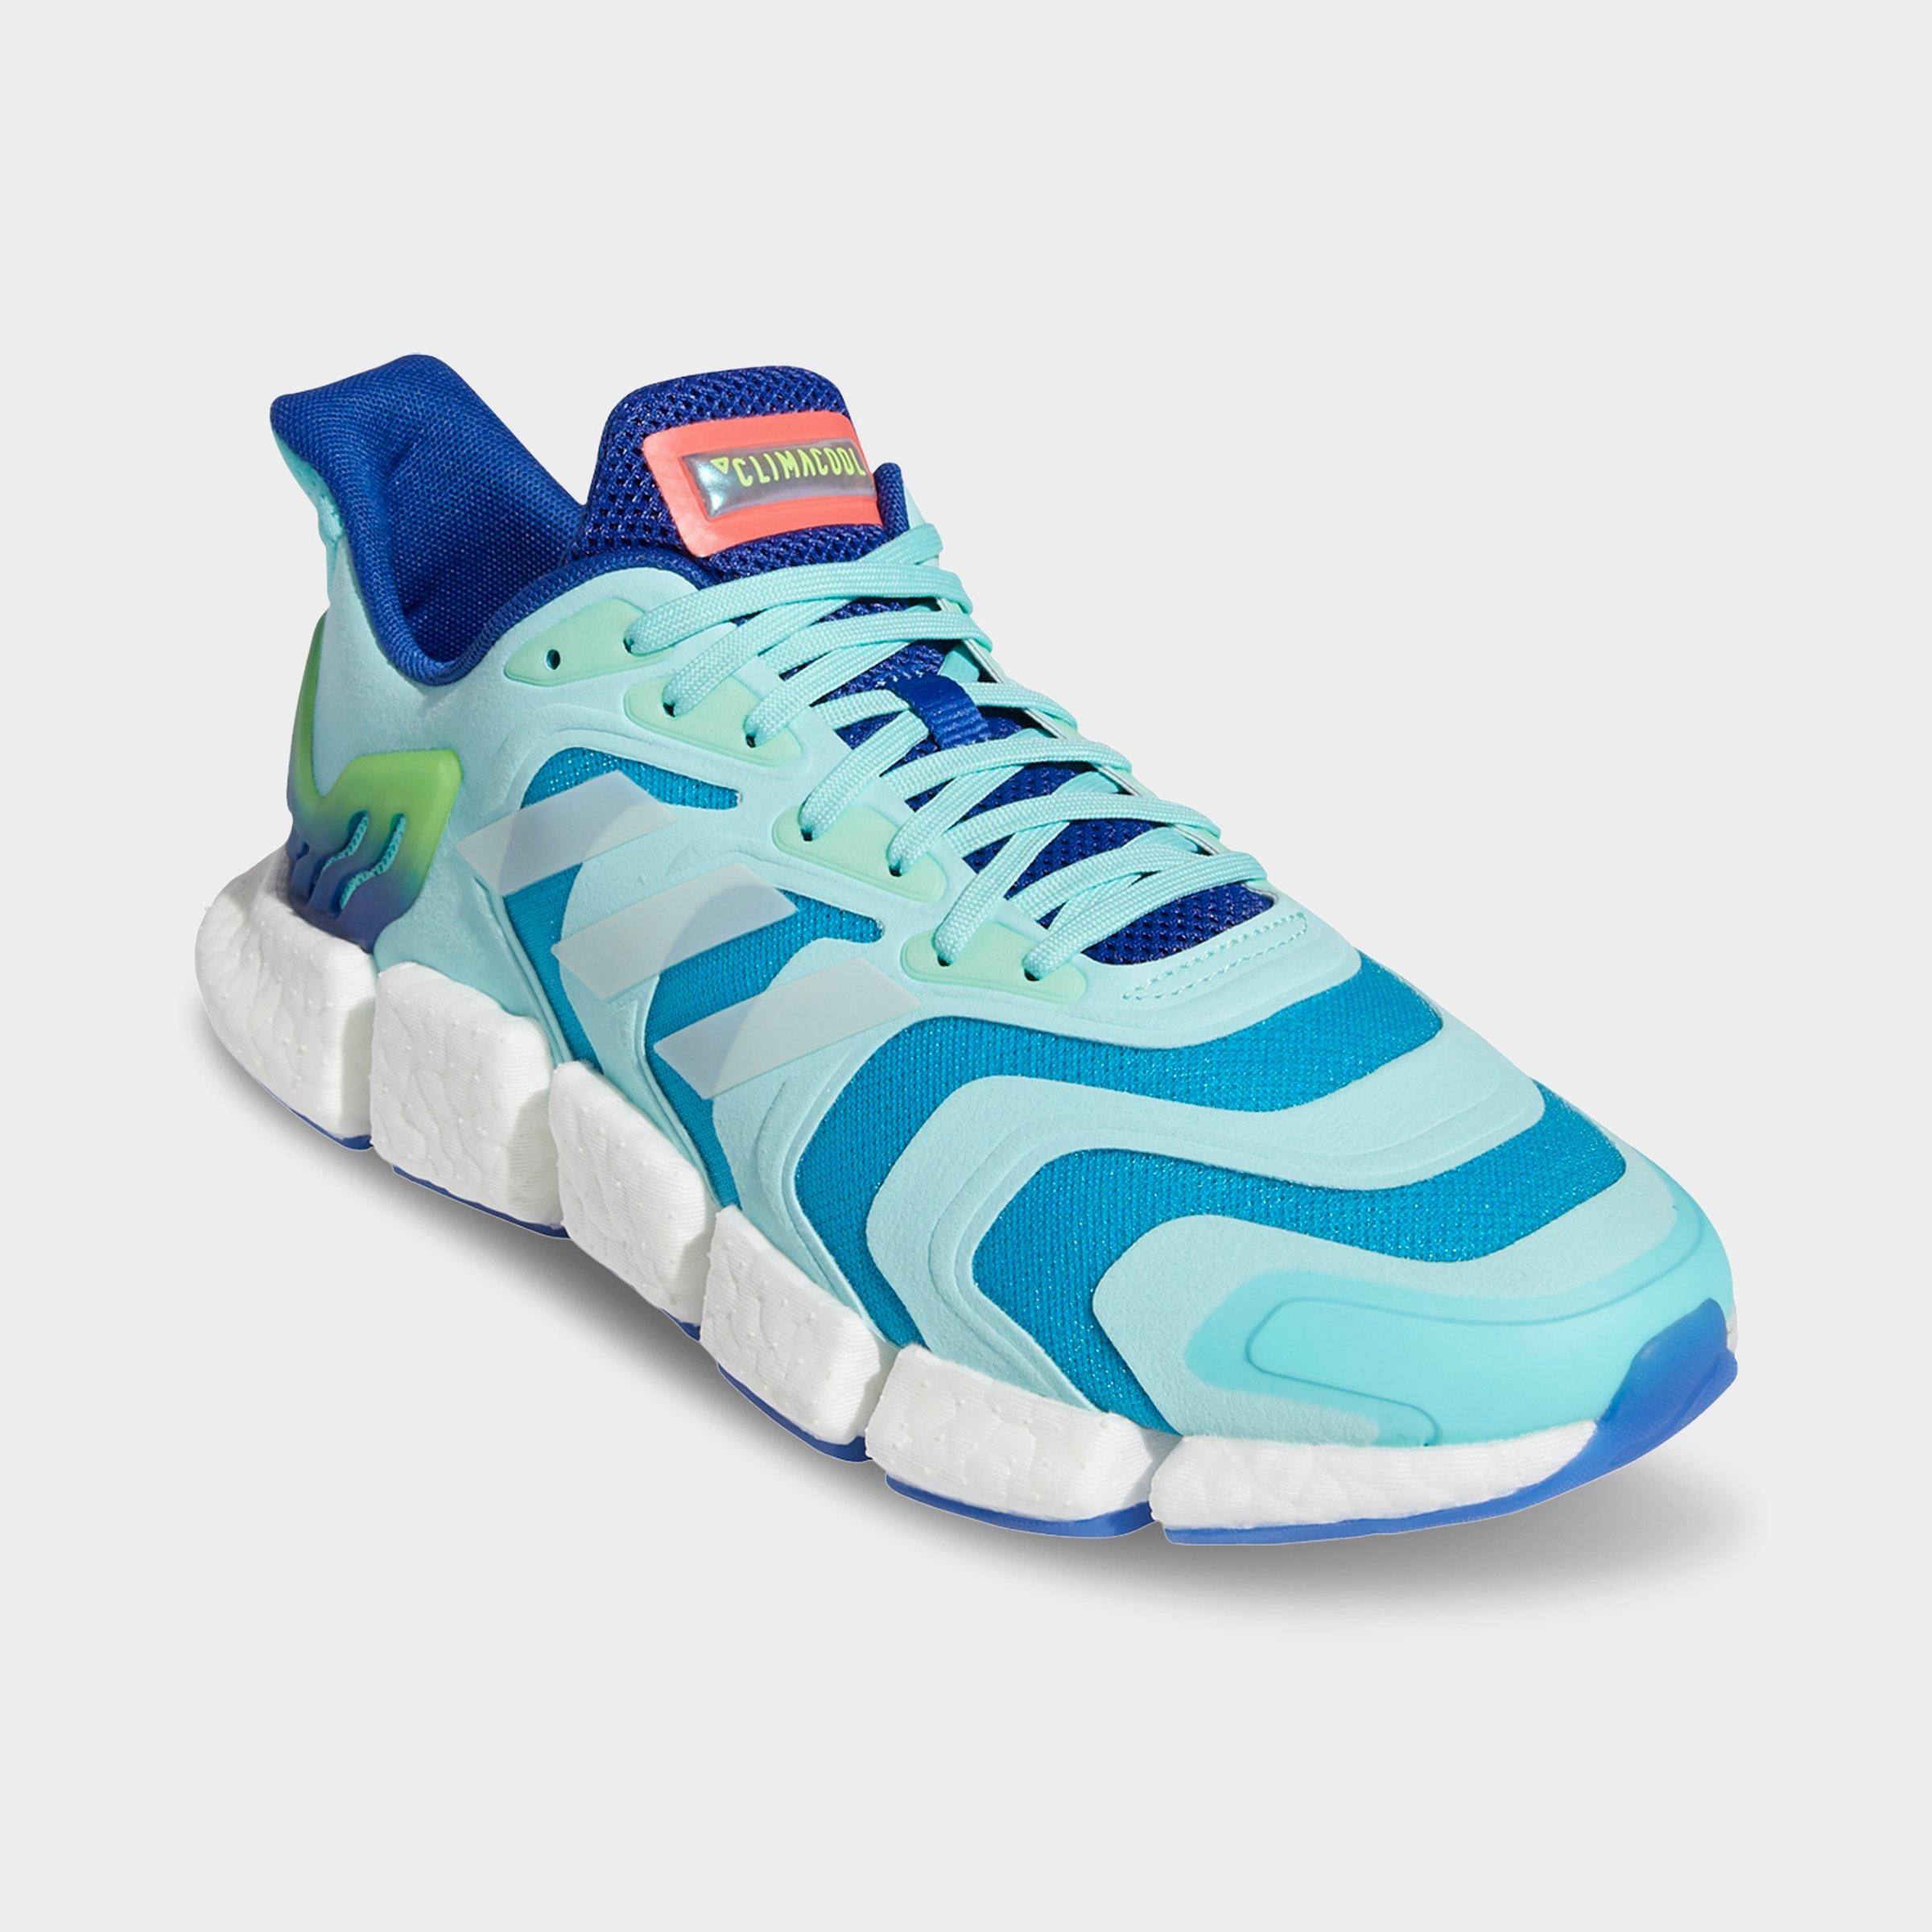 climacool adidas tennis shoes